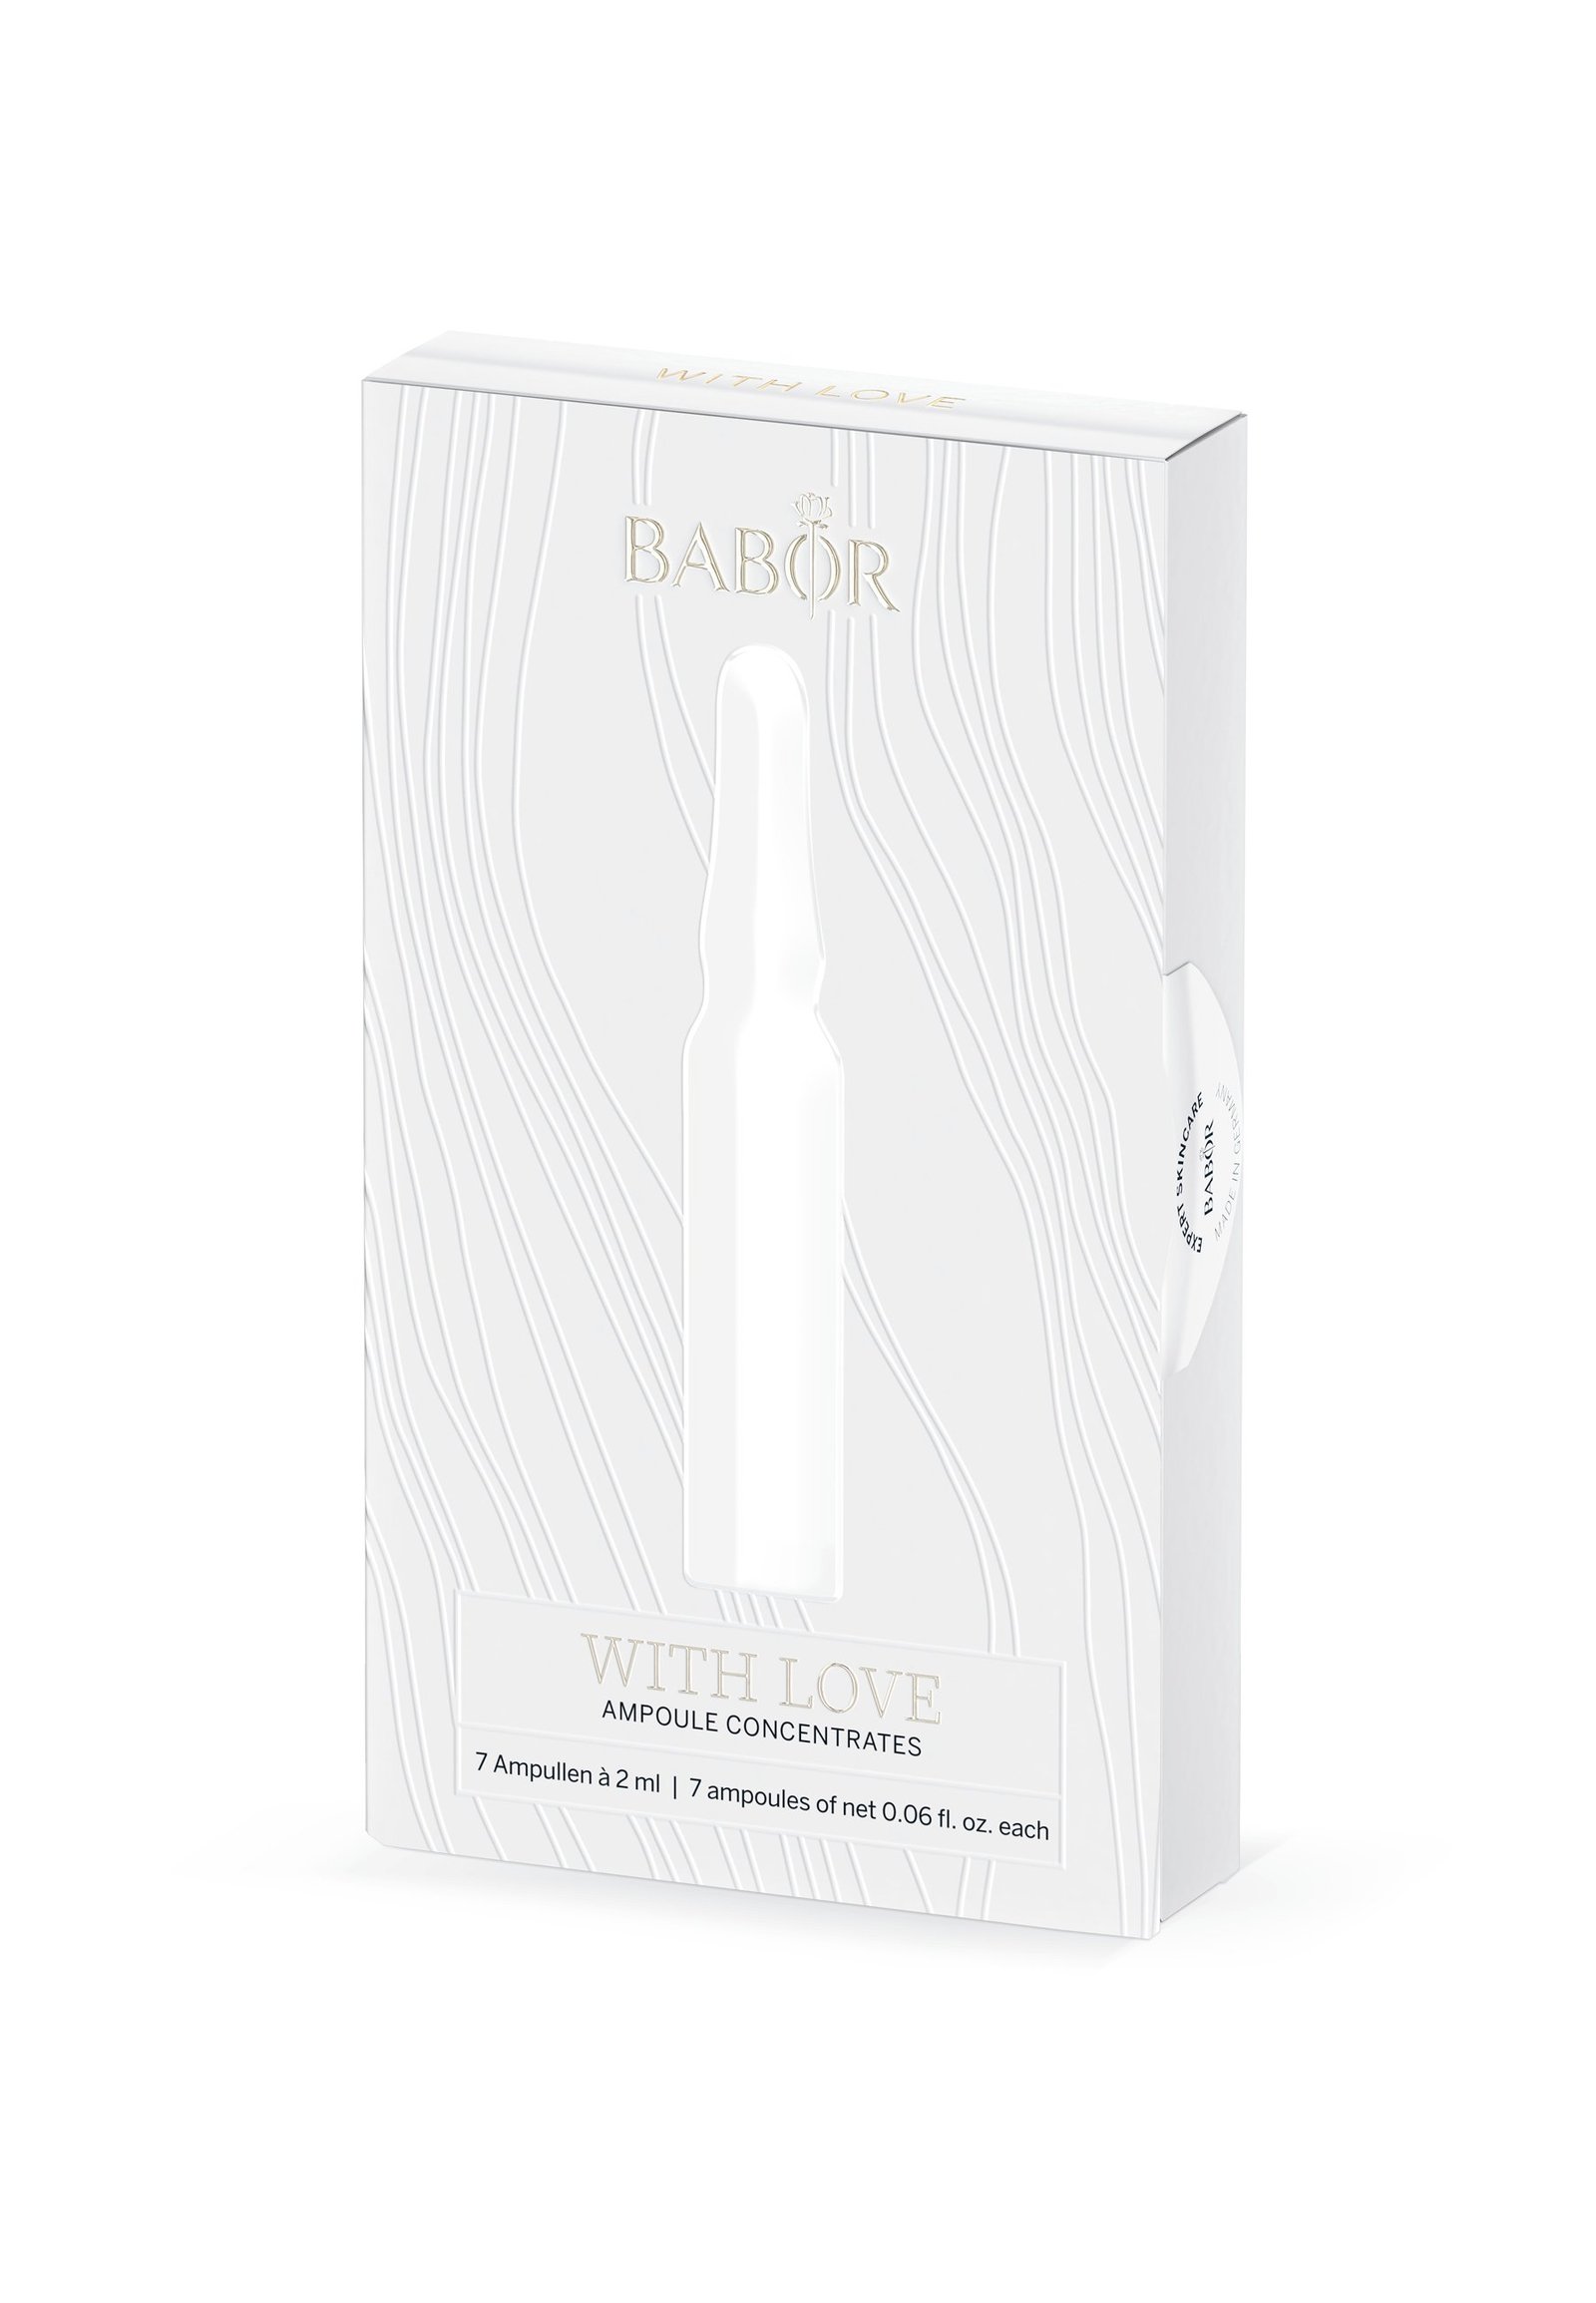 BABOR Ampoule Concentrates Gift Set 7 x 2 ml